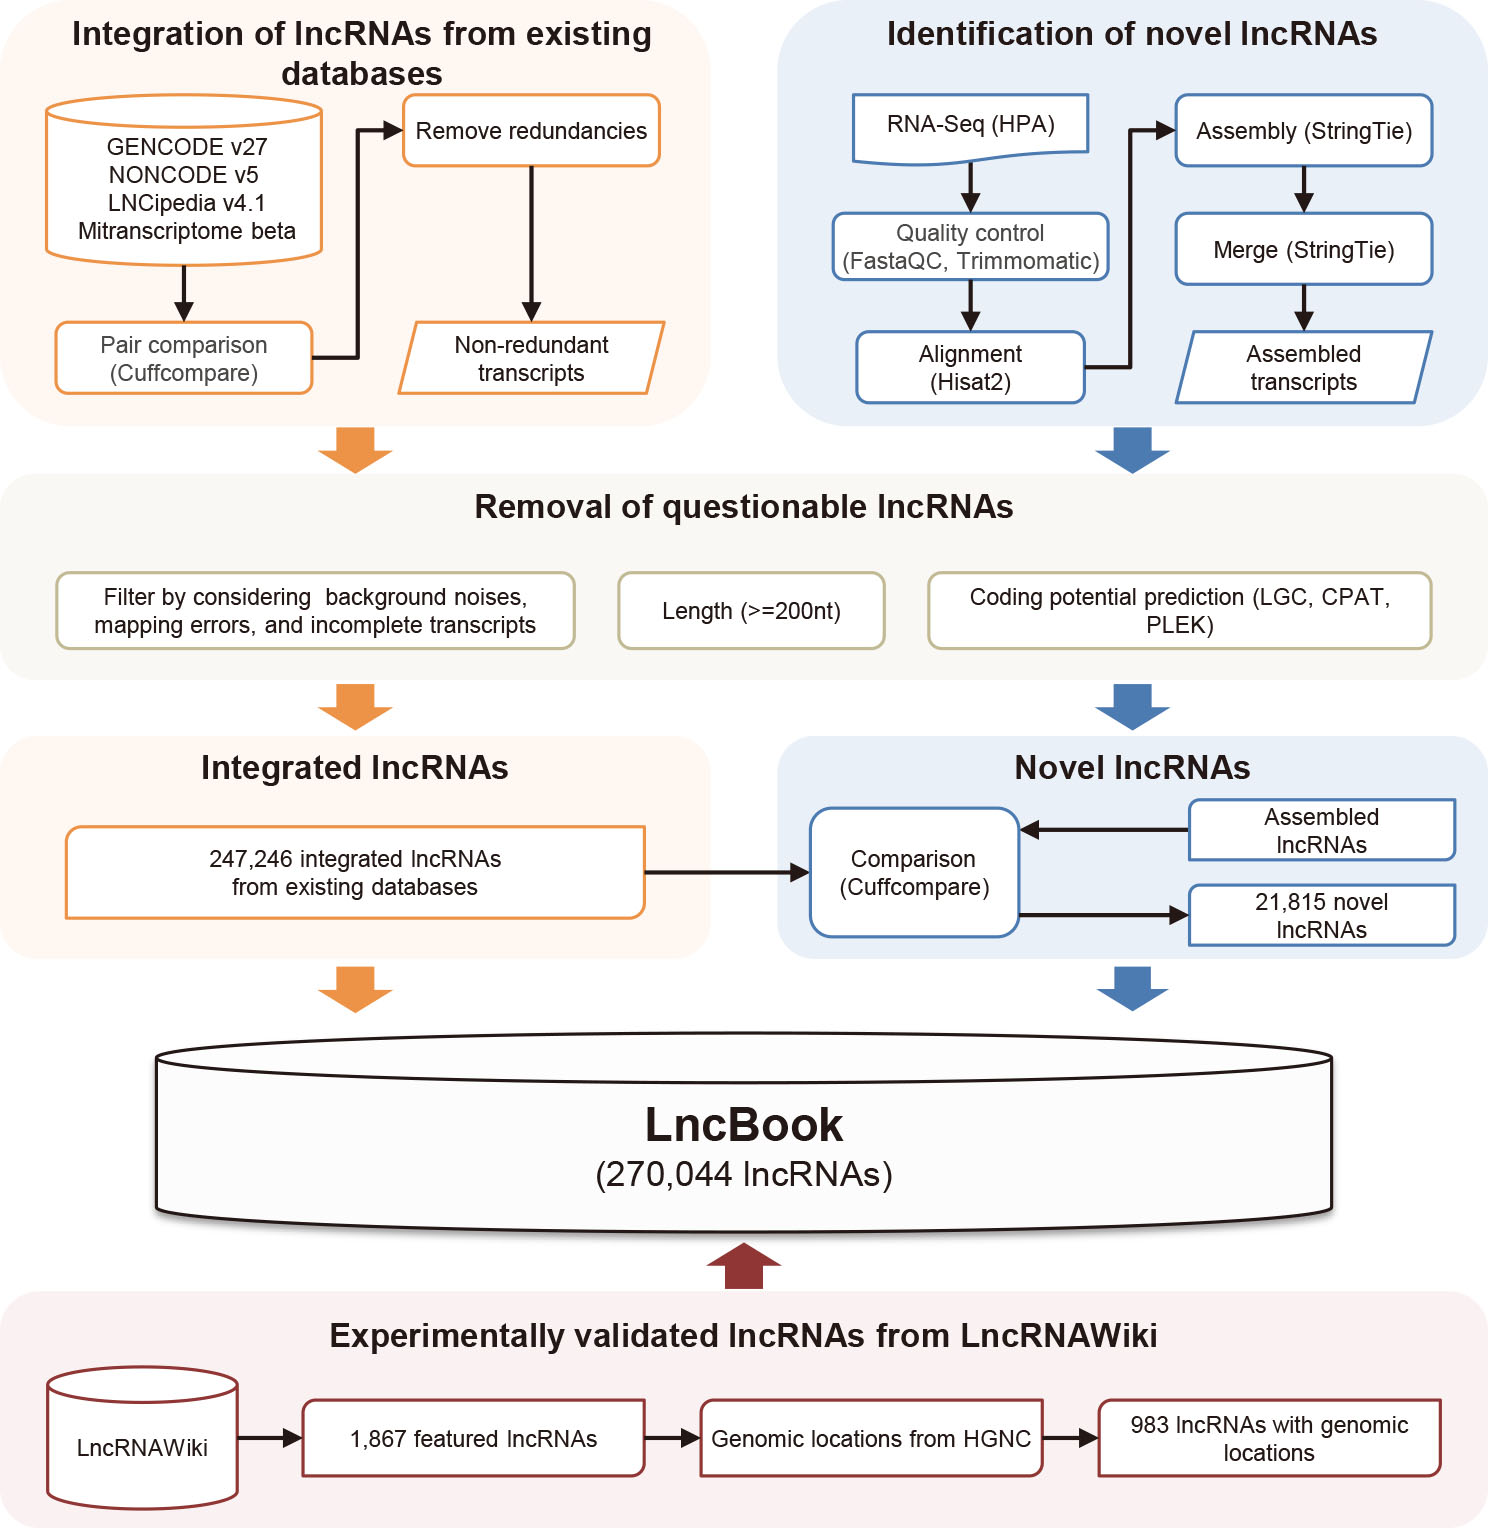 LncBook: A Curated Knowledgebase of Human Long Non-coding RNAs